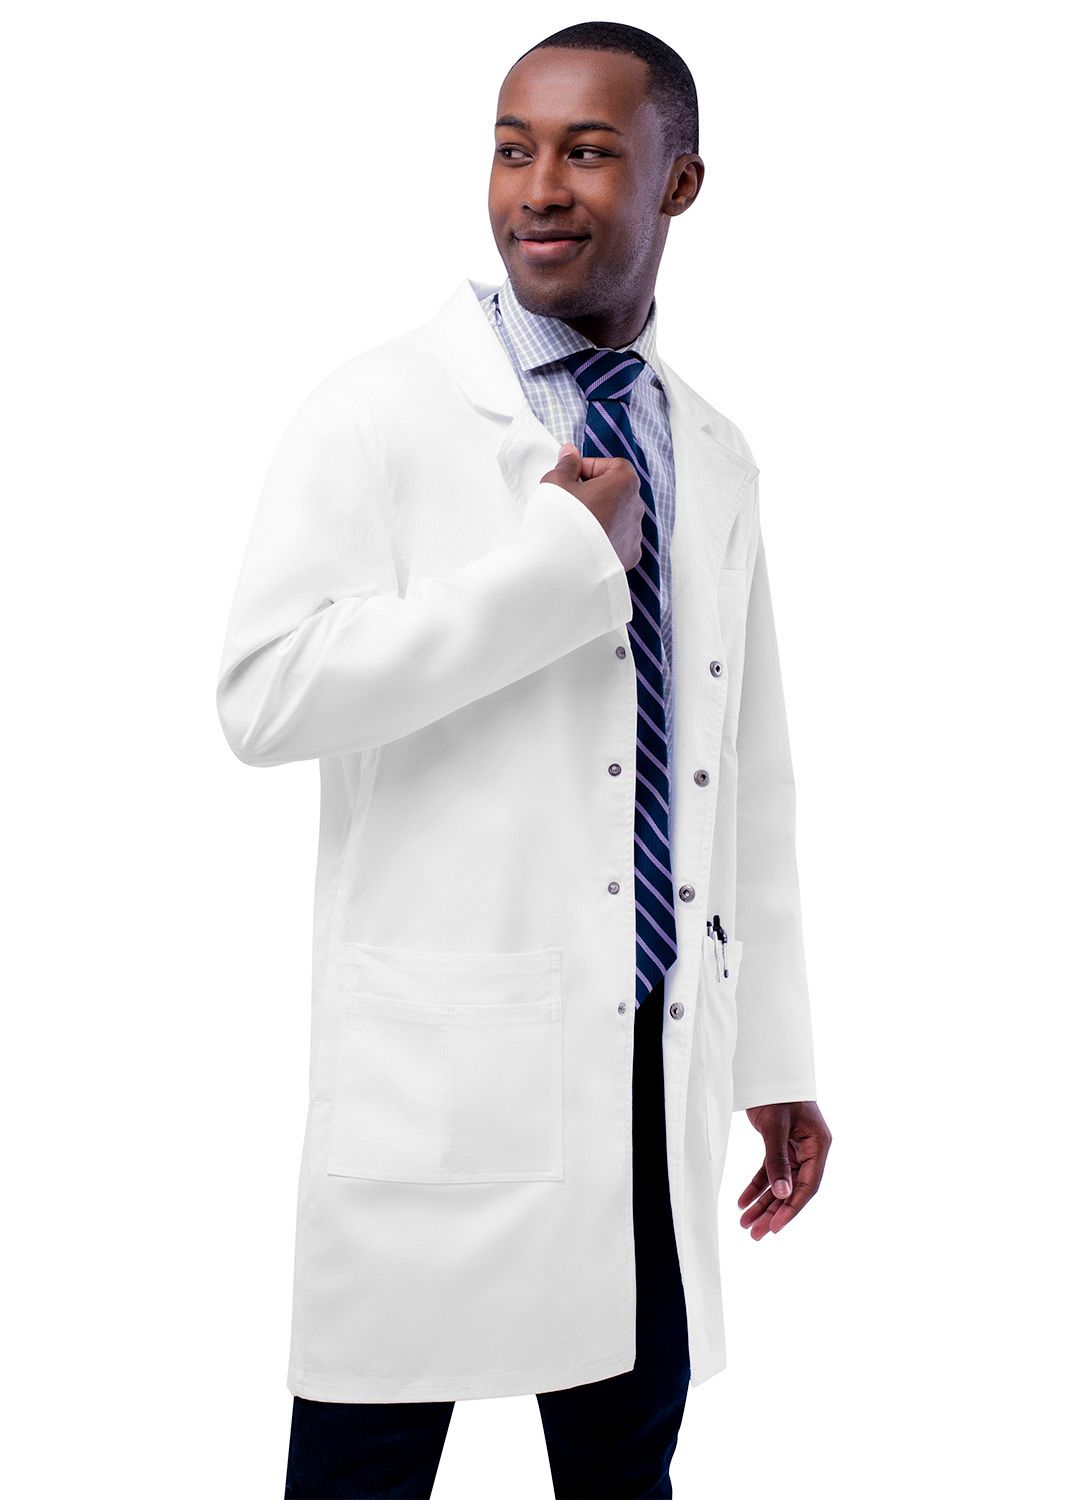 Large Size Scrubs Unisex Lab Coat – Traditional Collar- snap or